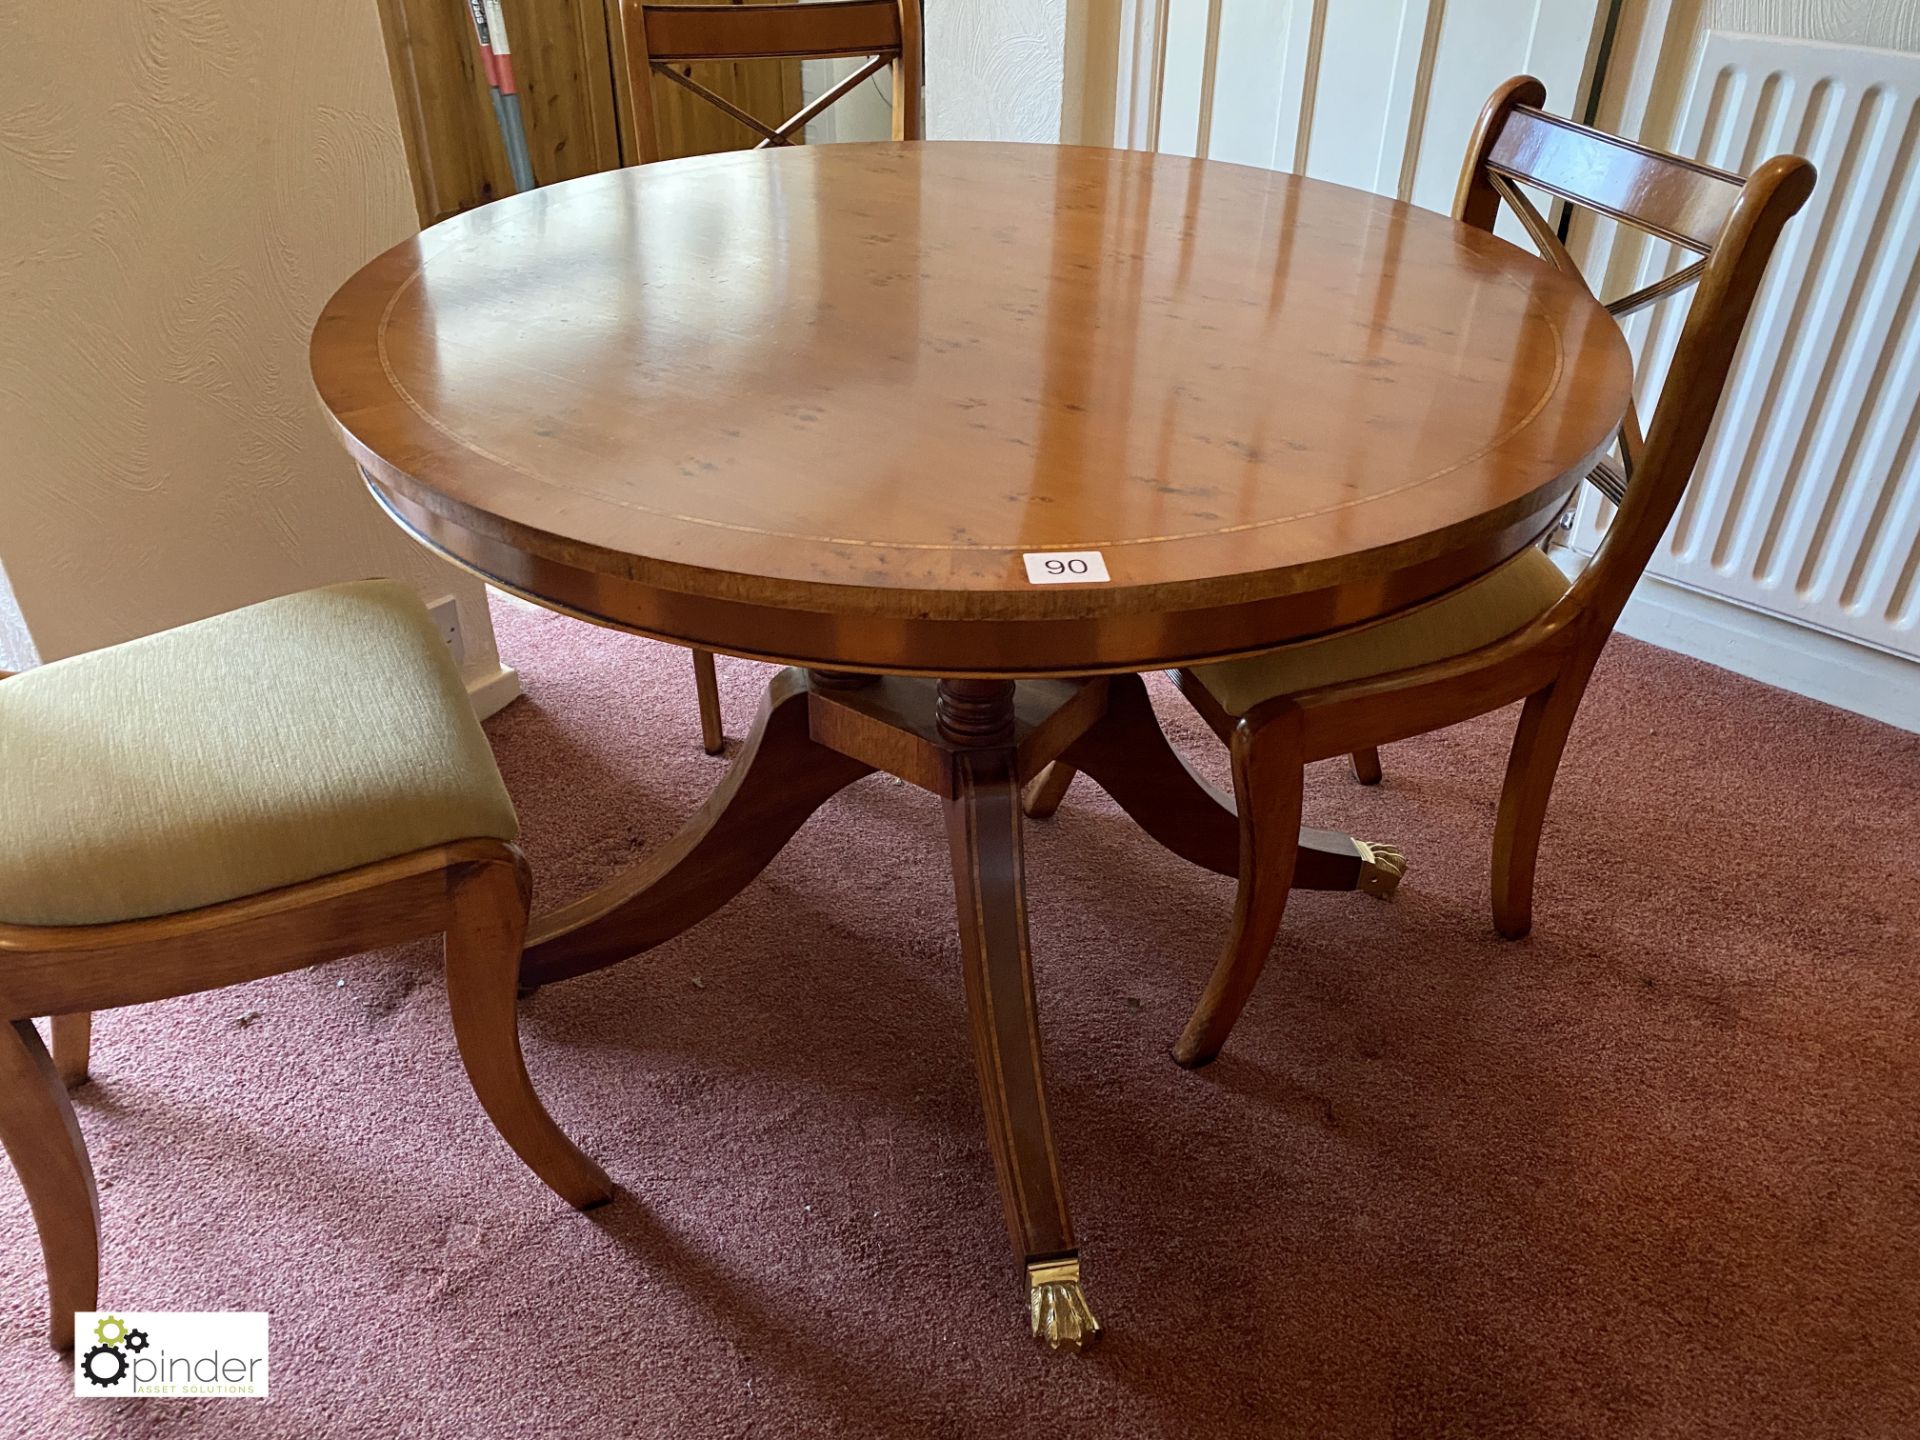 Burr walnut inlaid circular Dining Table, 1040mm diameter, with set 4 burr walnut and upholstered - Image 2 of 7